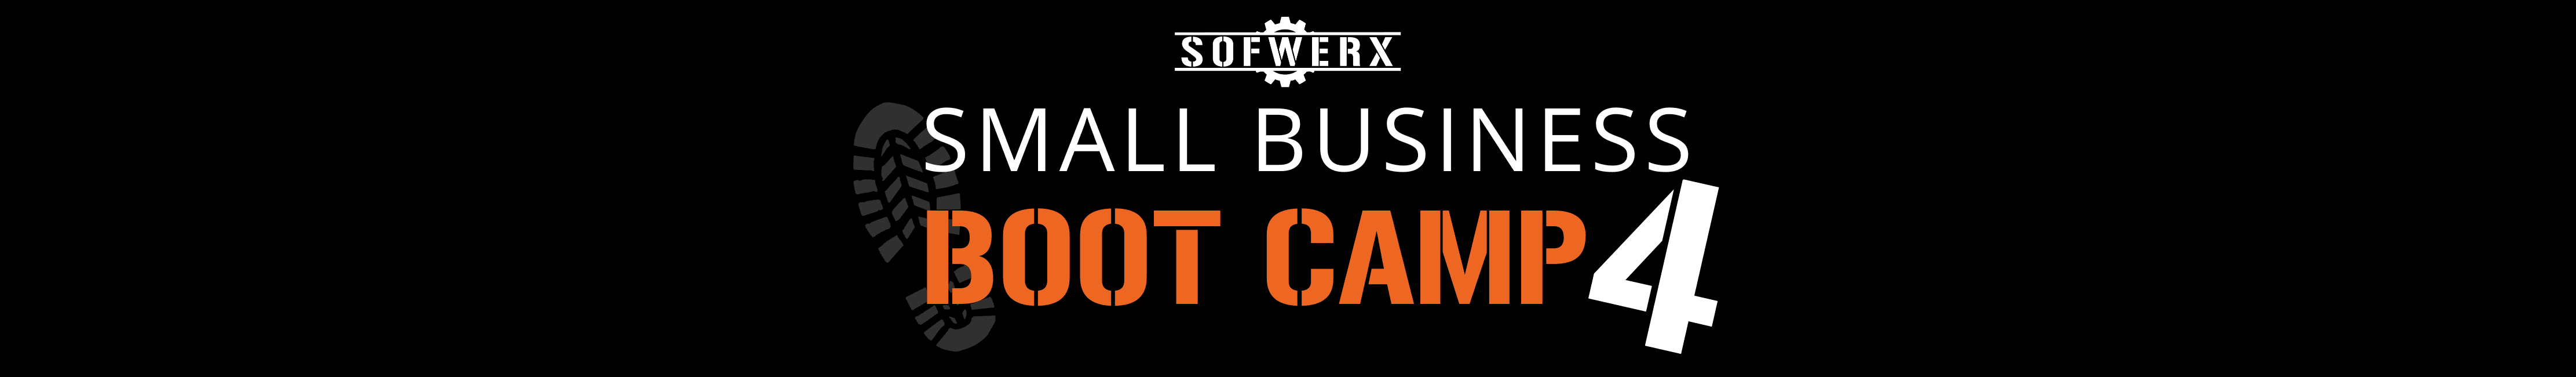 Small Business Boot Camp (SBBC) 4